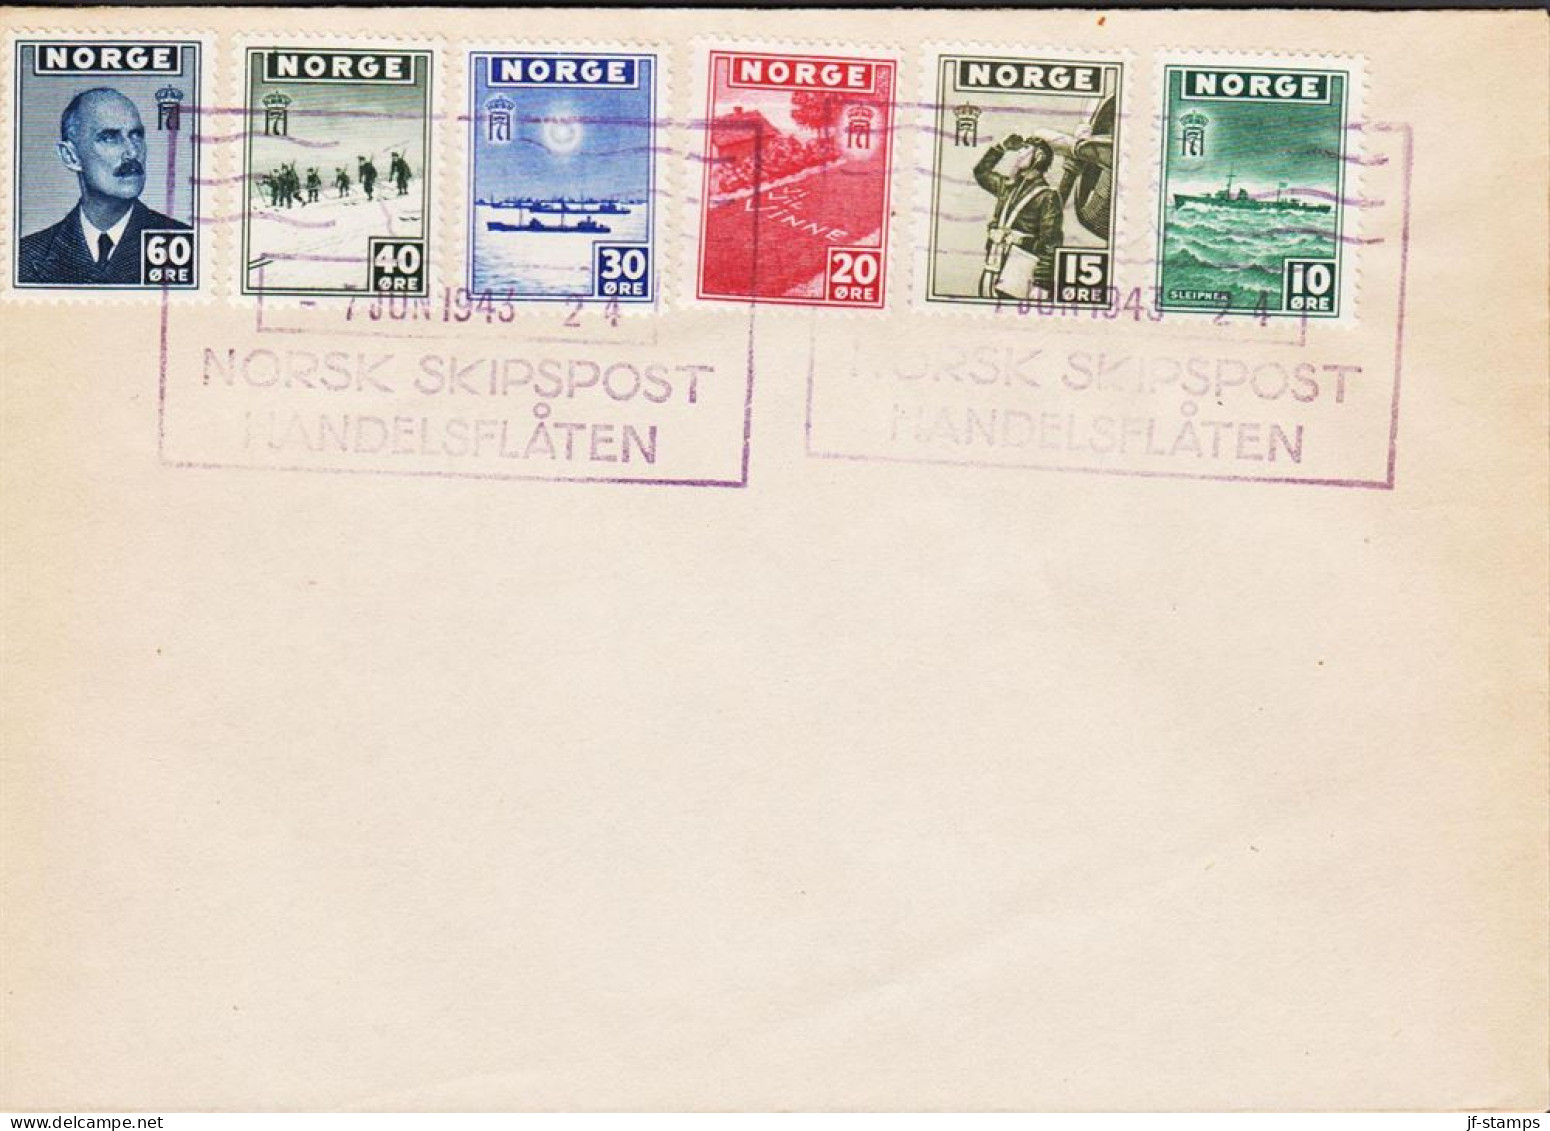 1943. NORGE. Fine Envelope With 10, 15, 20, 30 40 And 60 ØRE London Issue Cancelled With ... (Michel 278-283) - JF545678 - Cartas & Documentos